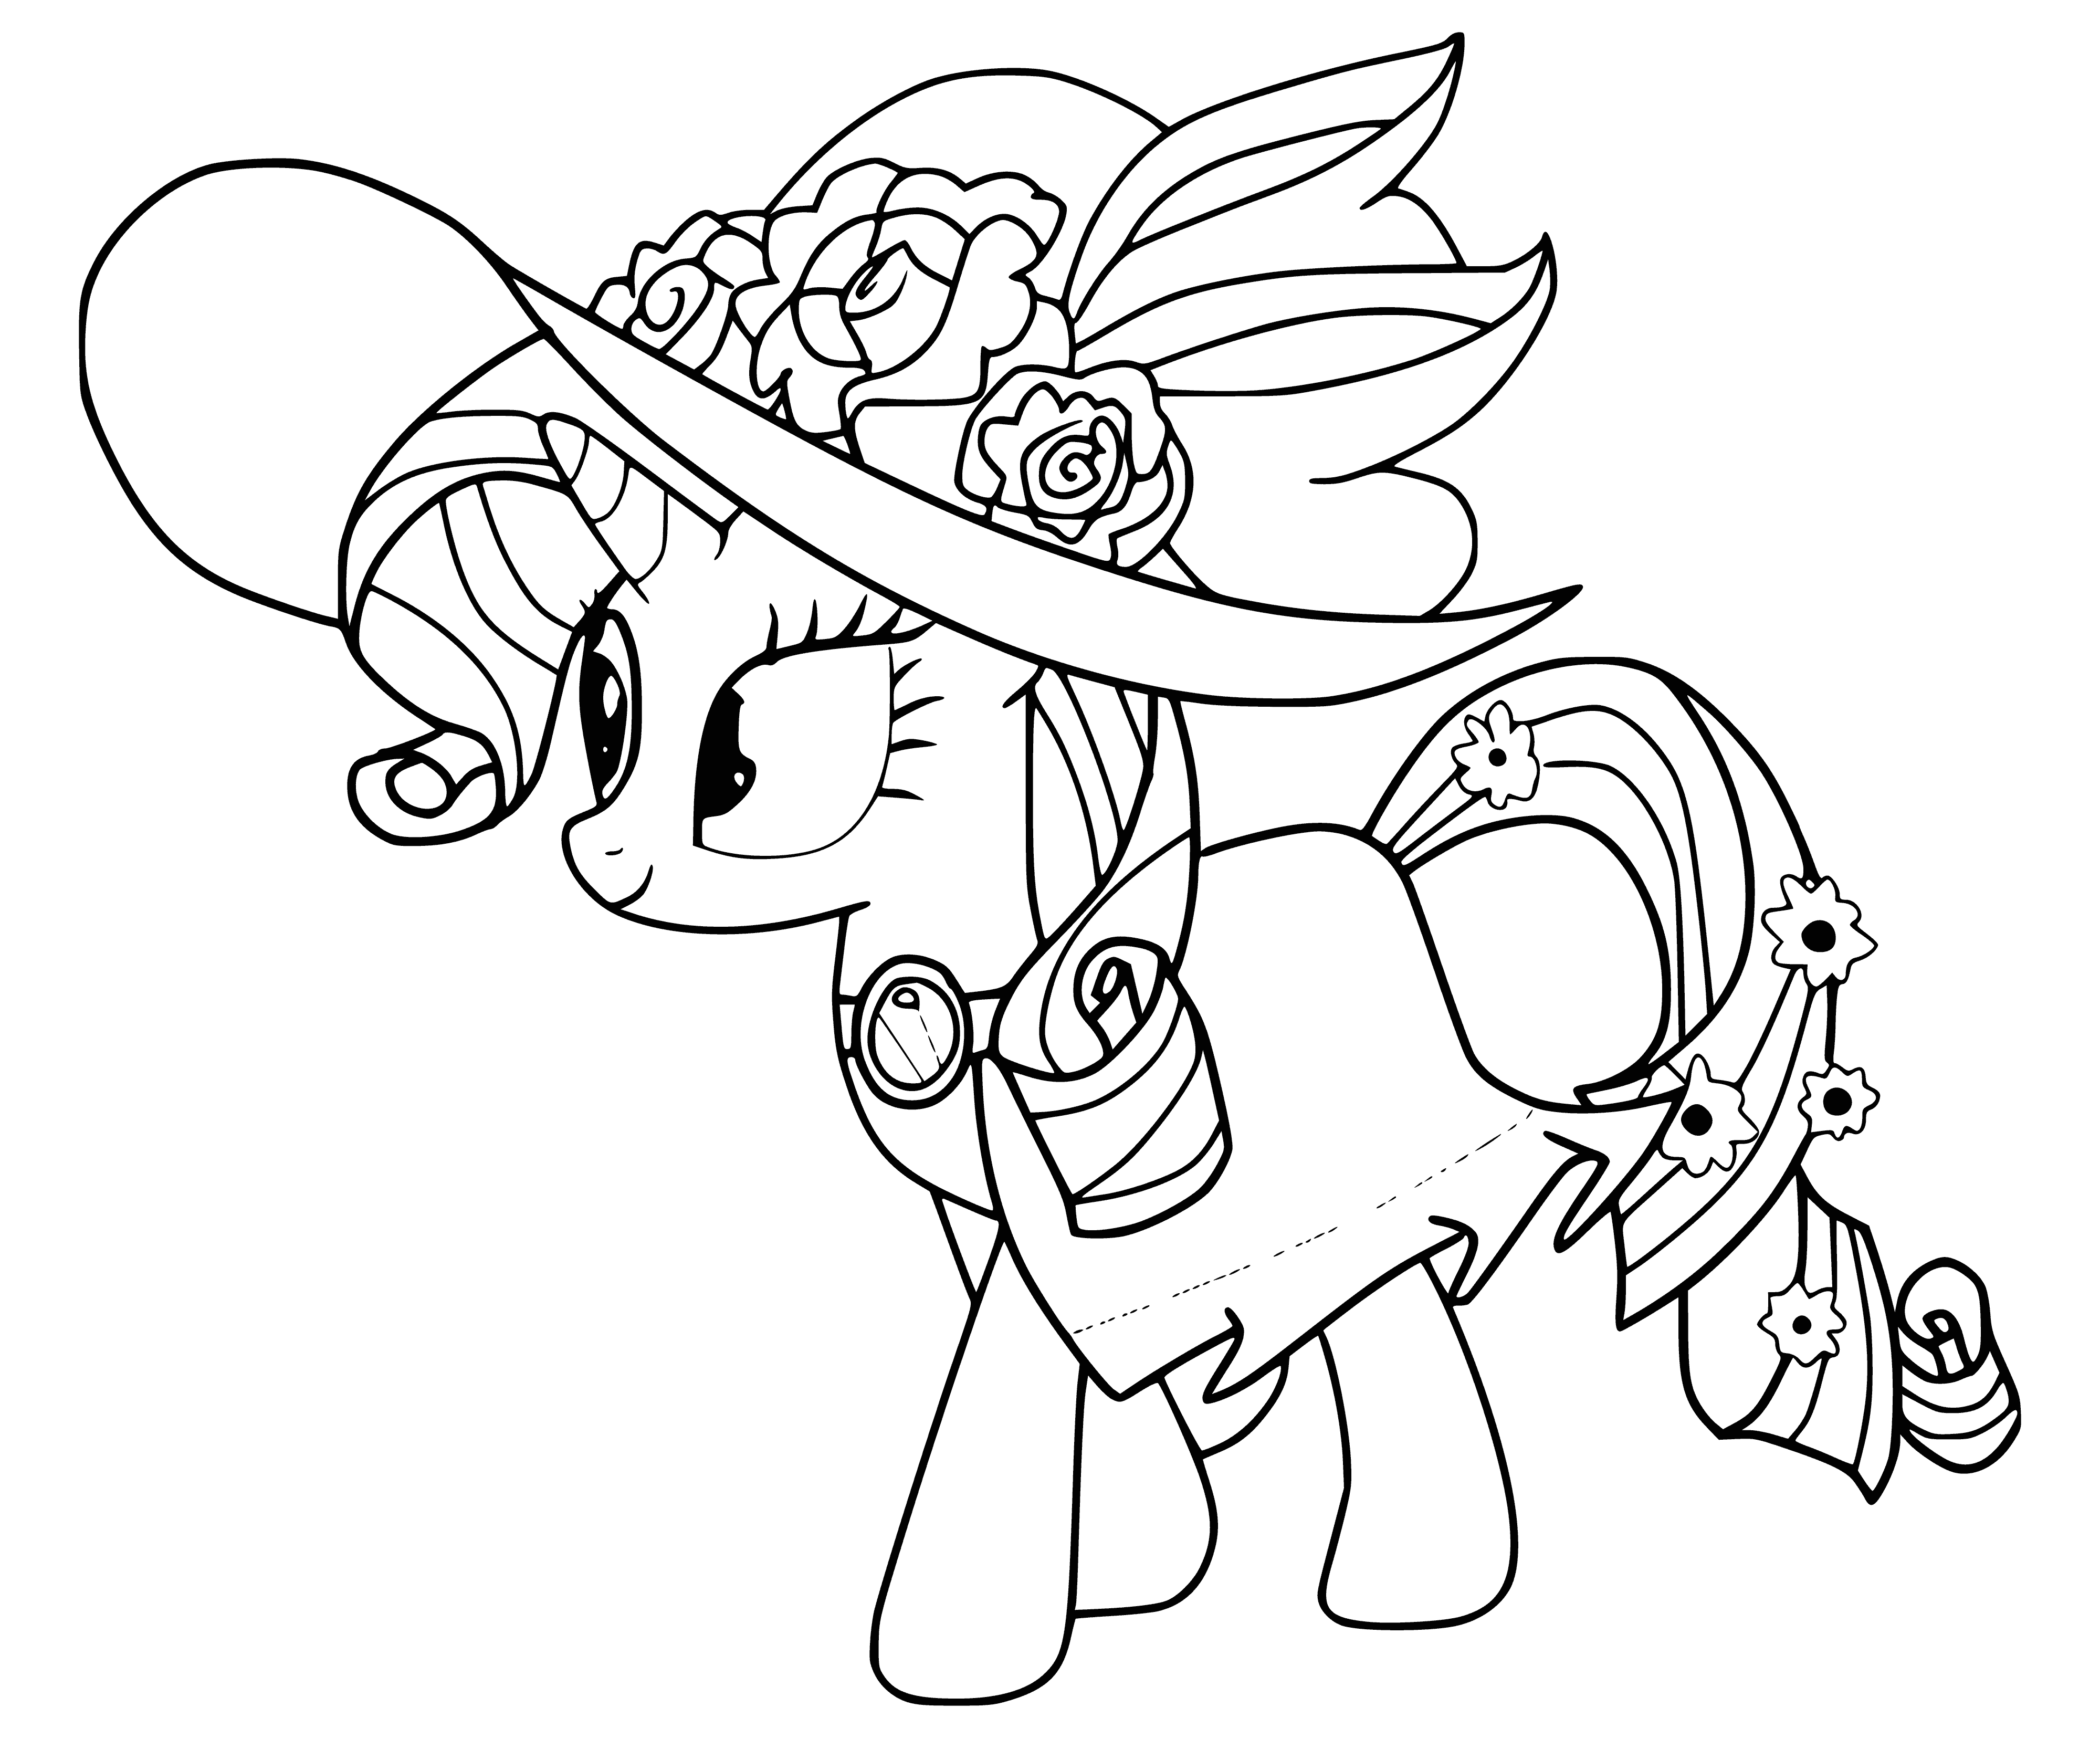 coloring page: Girl riding a white horse in blue saddle and bridle holds a pink parasol and a basket of flowers. Wears blue dress, white apron, pink bow, and large white hat.